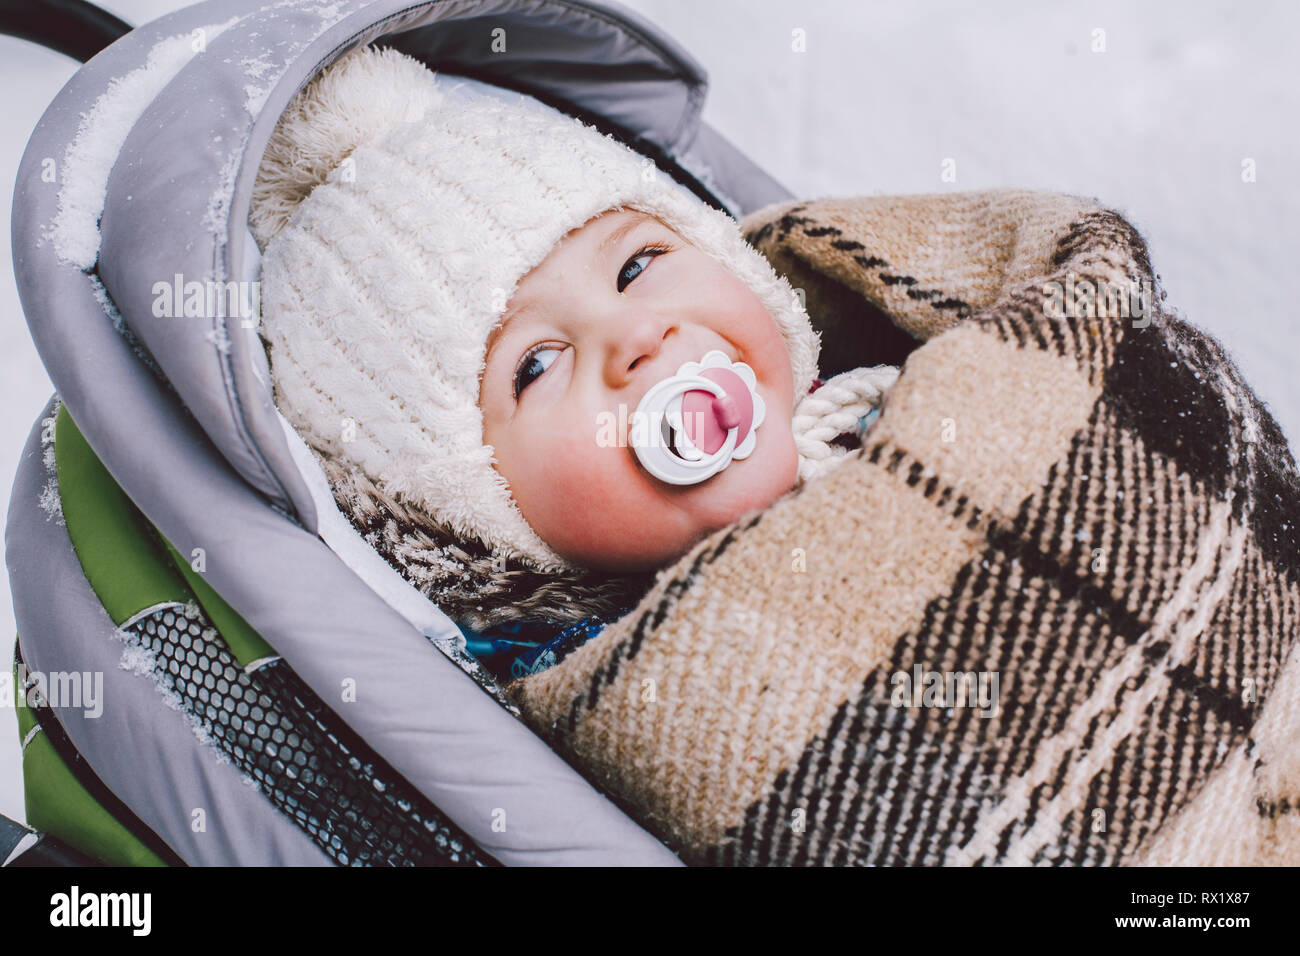 High angle close-up of cute baby boy looking away while lying in baby stroller at park during winter Stock Photo